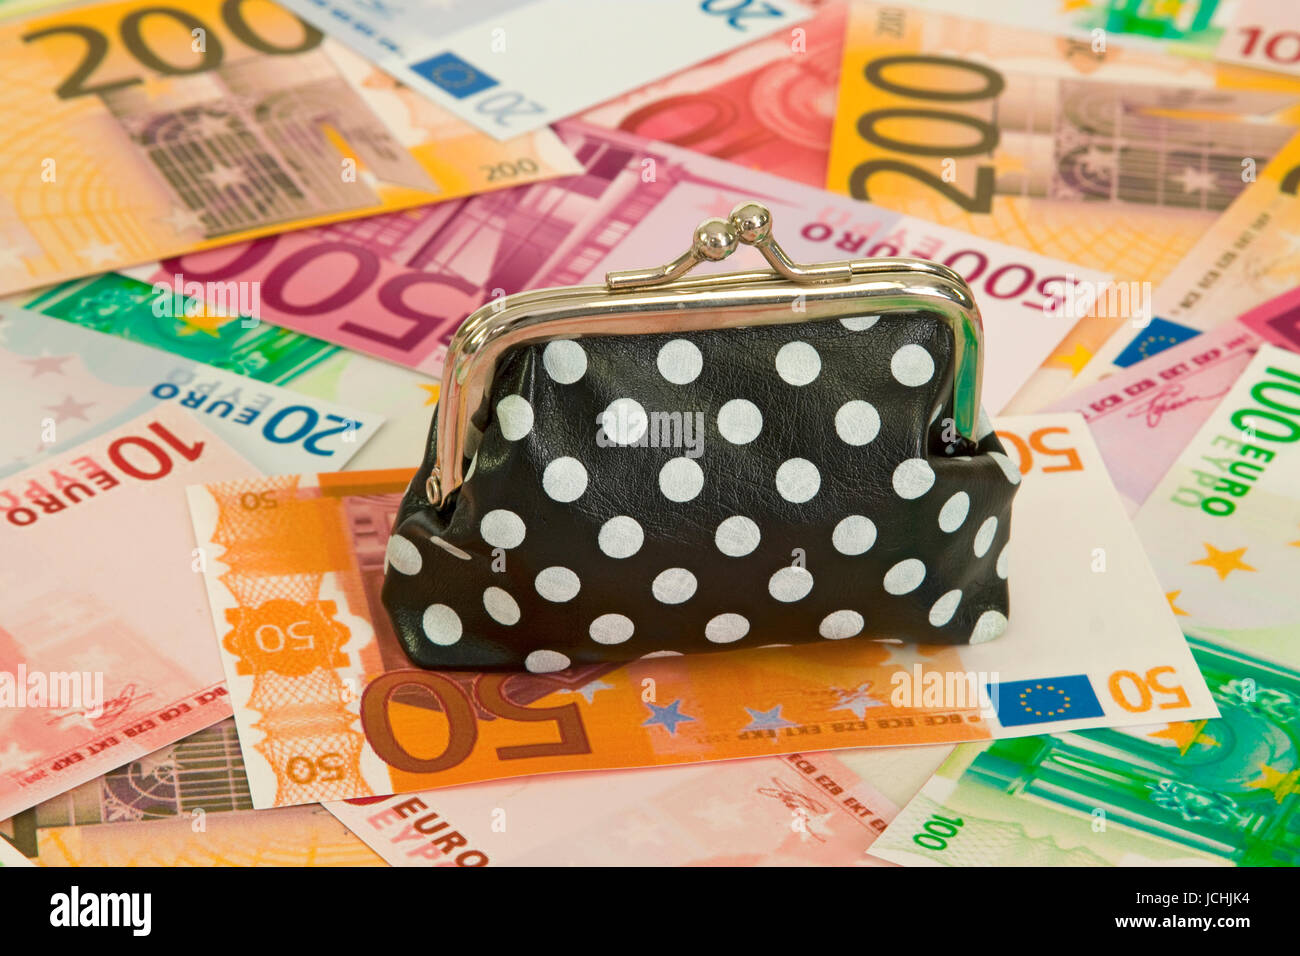 Purse with euro banknotes as background Stock Photo